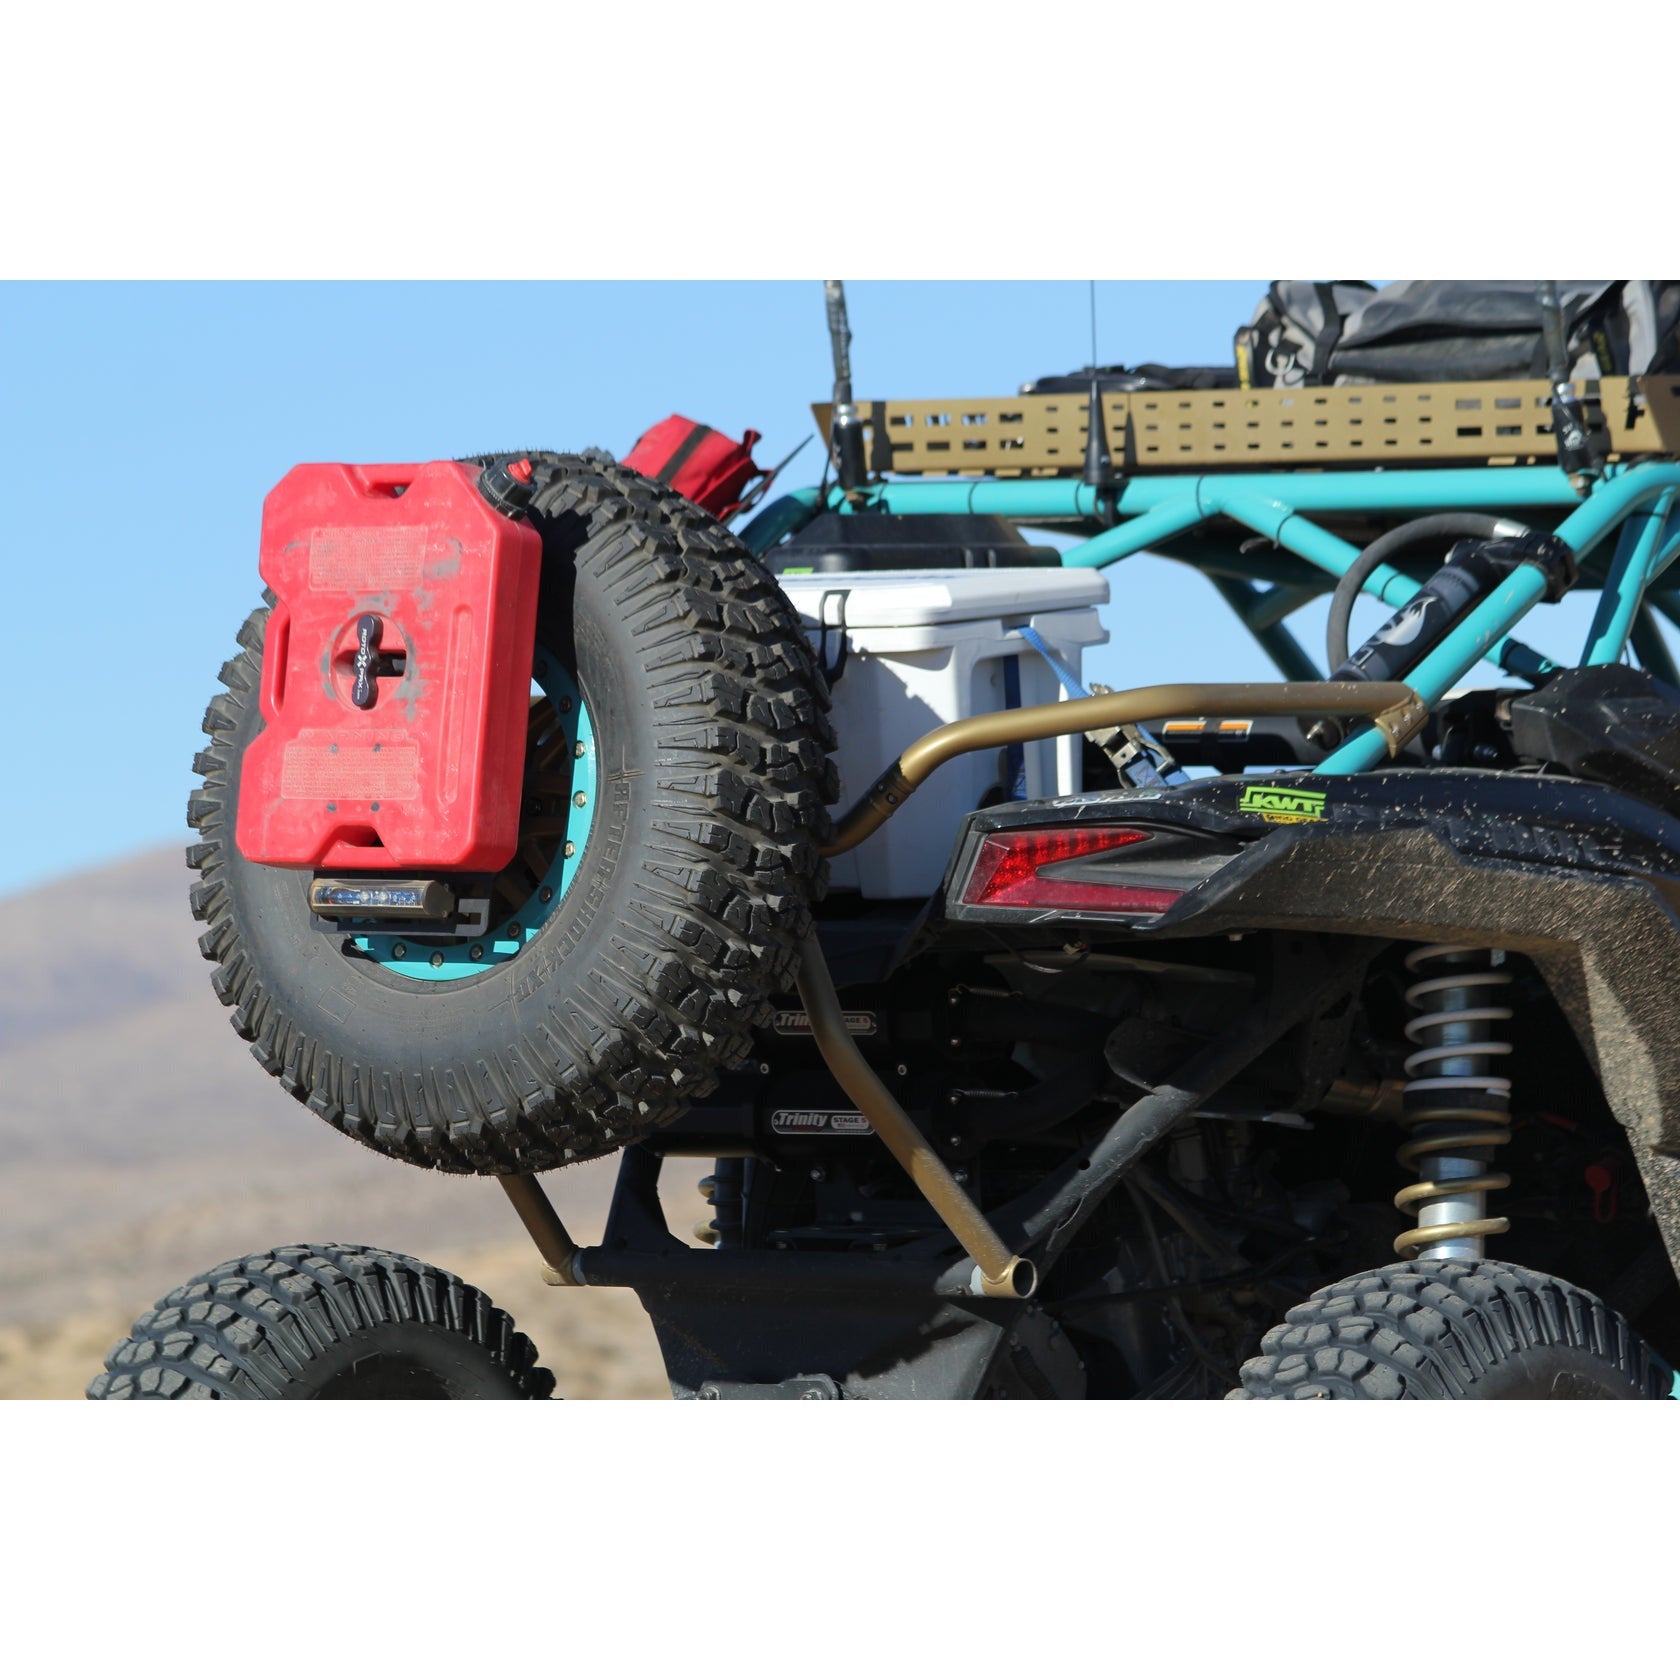 Can Am X3 Spare Tire Carrier